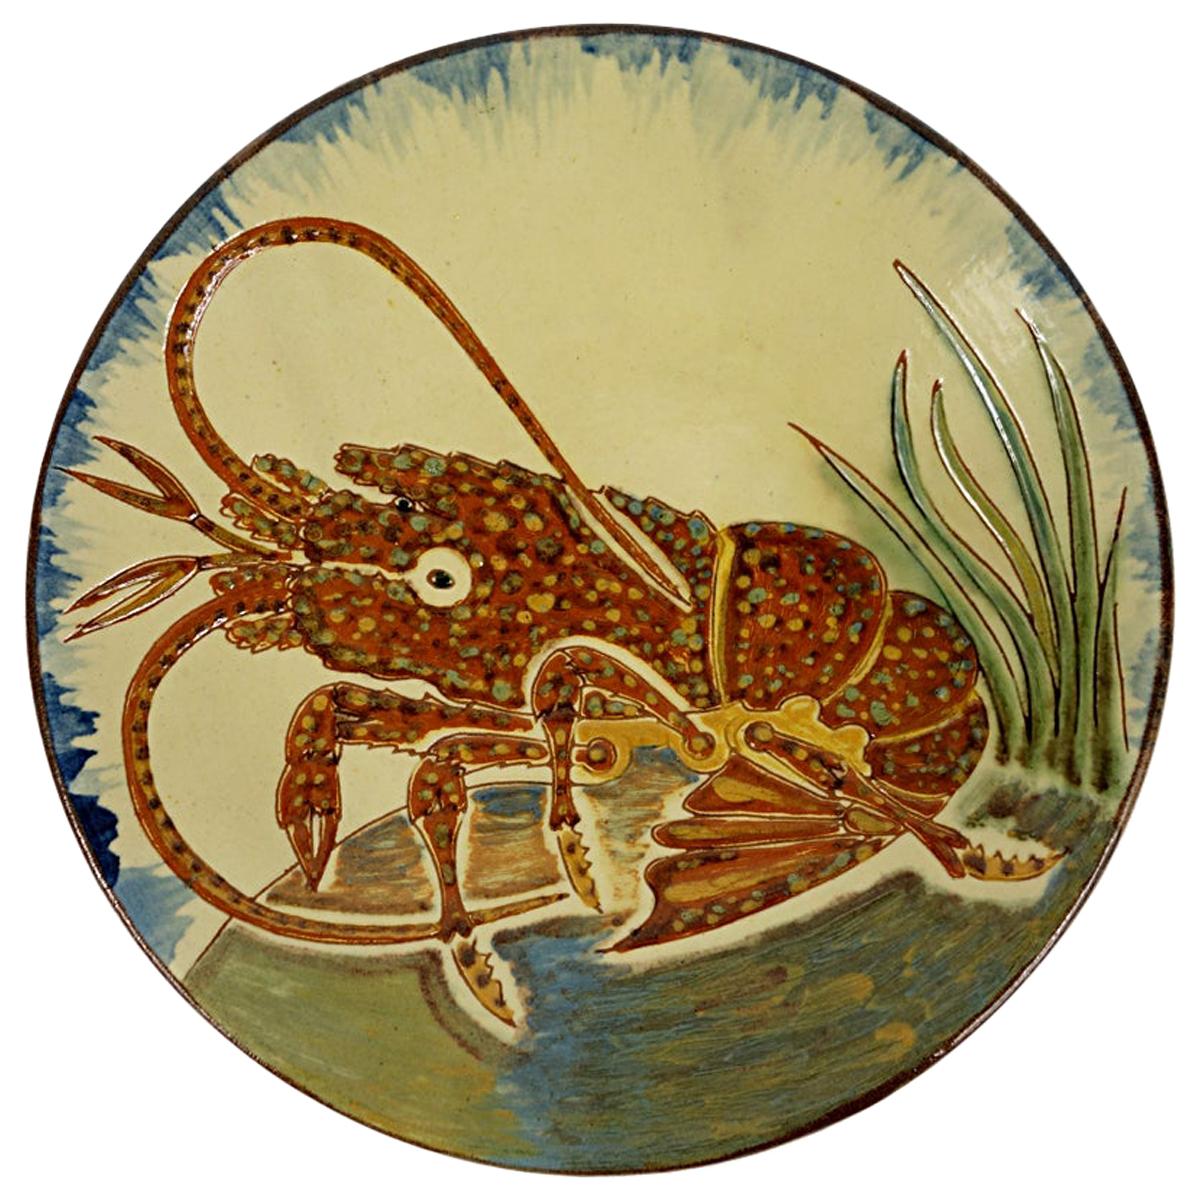 Ceramic Wall Plate with Lobster Decor Signed by Spanish Maker Puigdemont